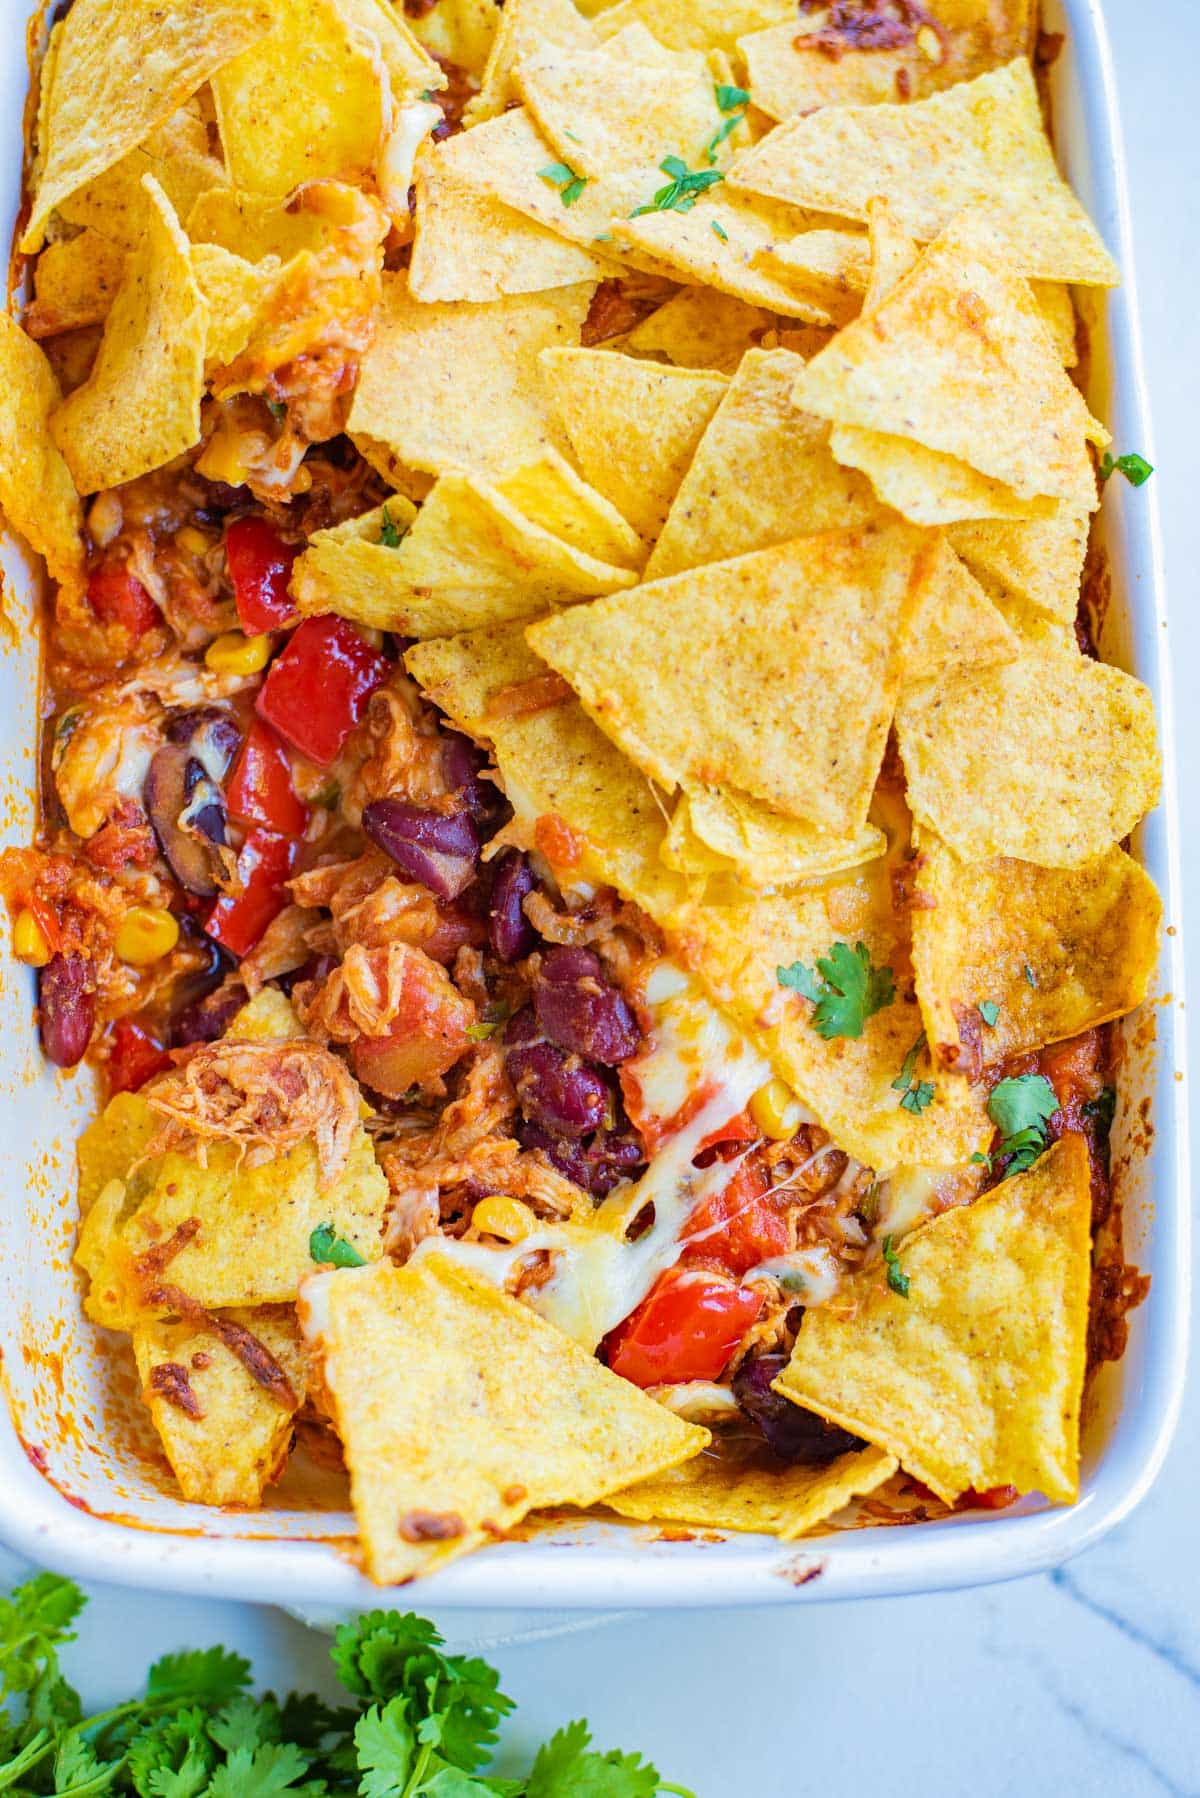 baking dish full of Doritos, chicken, beans, tomatoes, and cilantro on the side